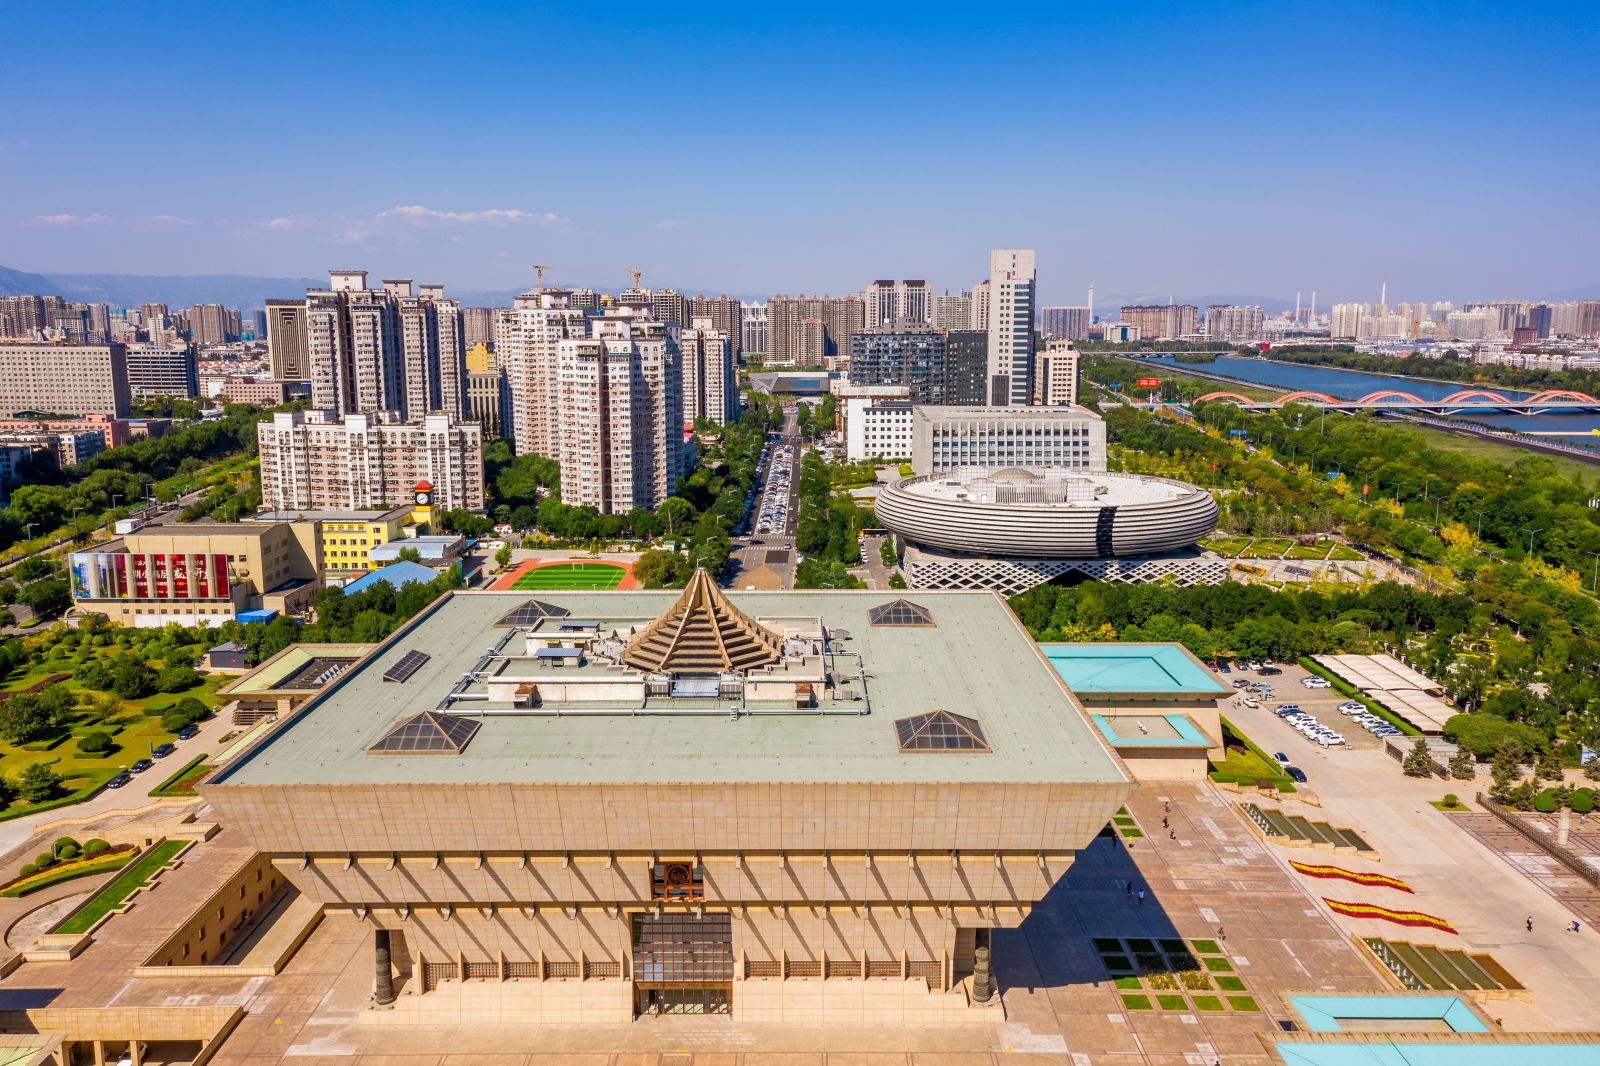 The Aerial View，Shanxi Museum